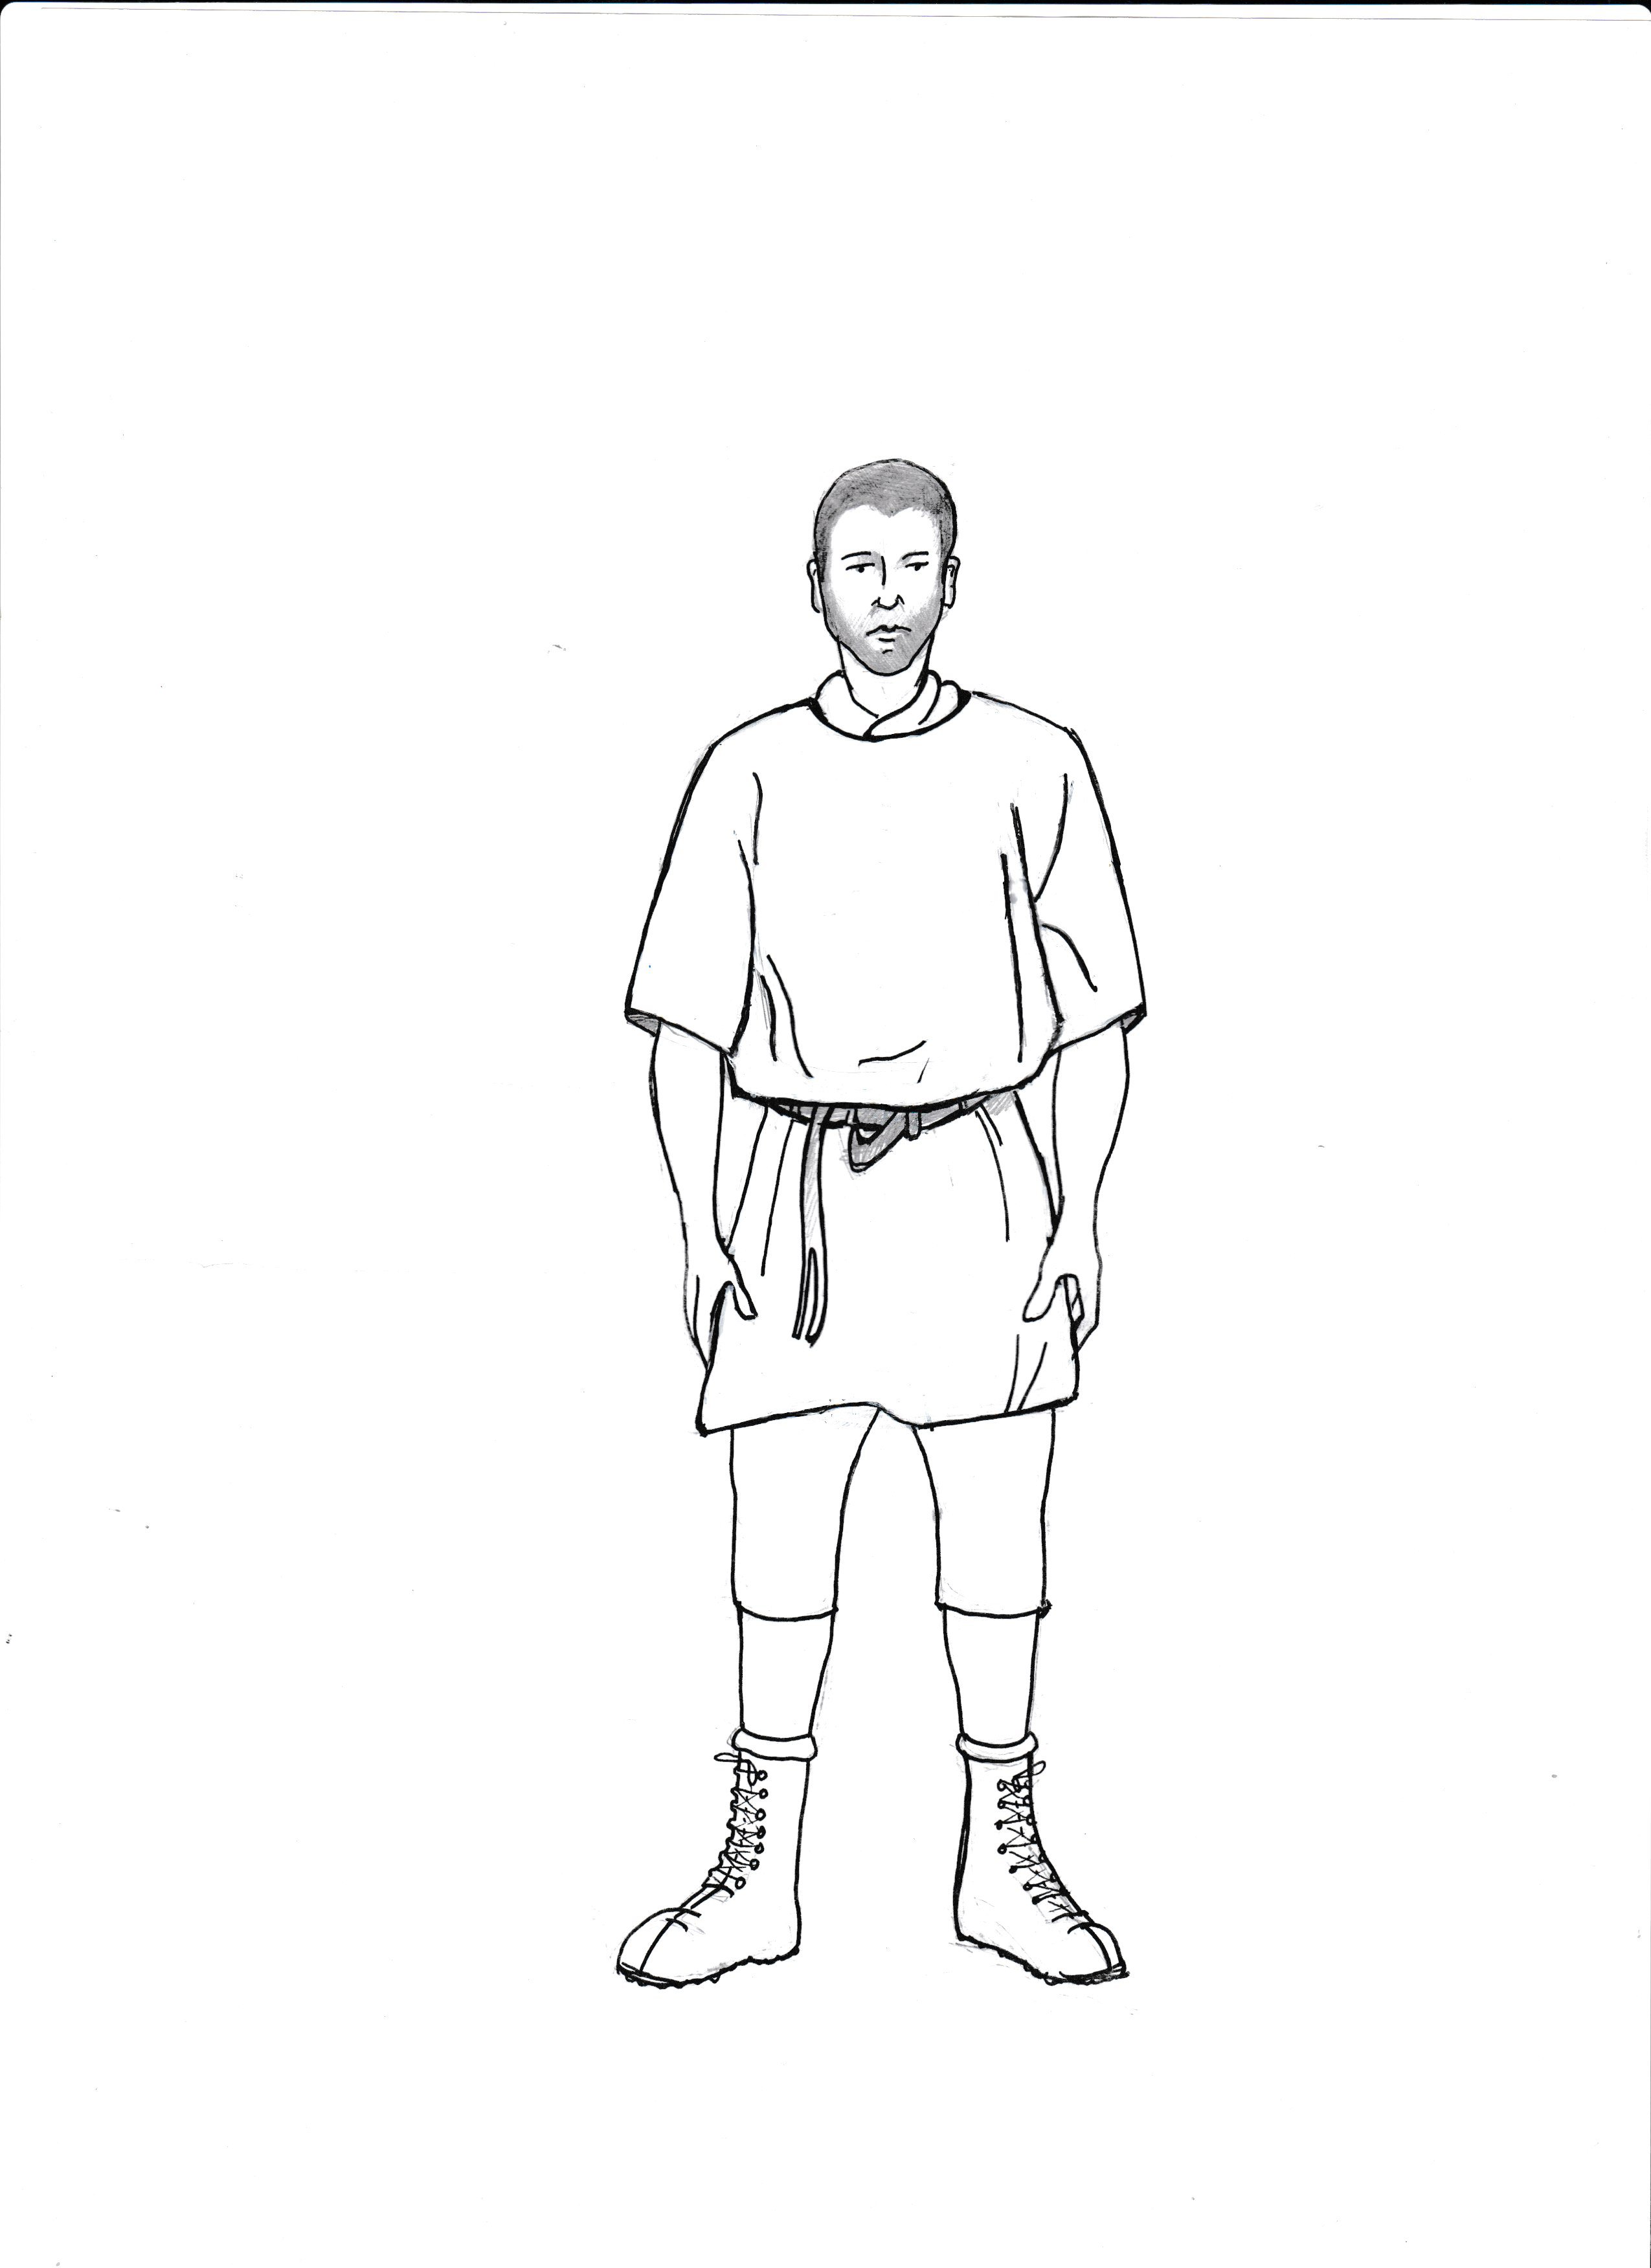 Illustration of infantry auxiliary soldier’s soft kit.